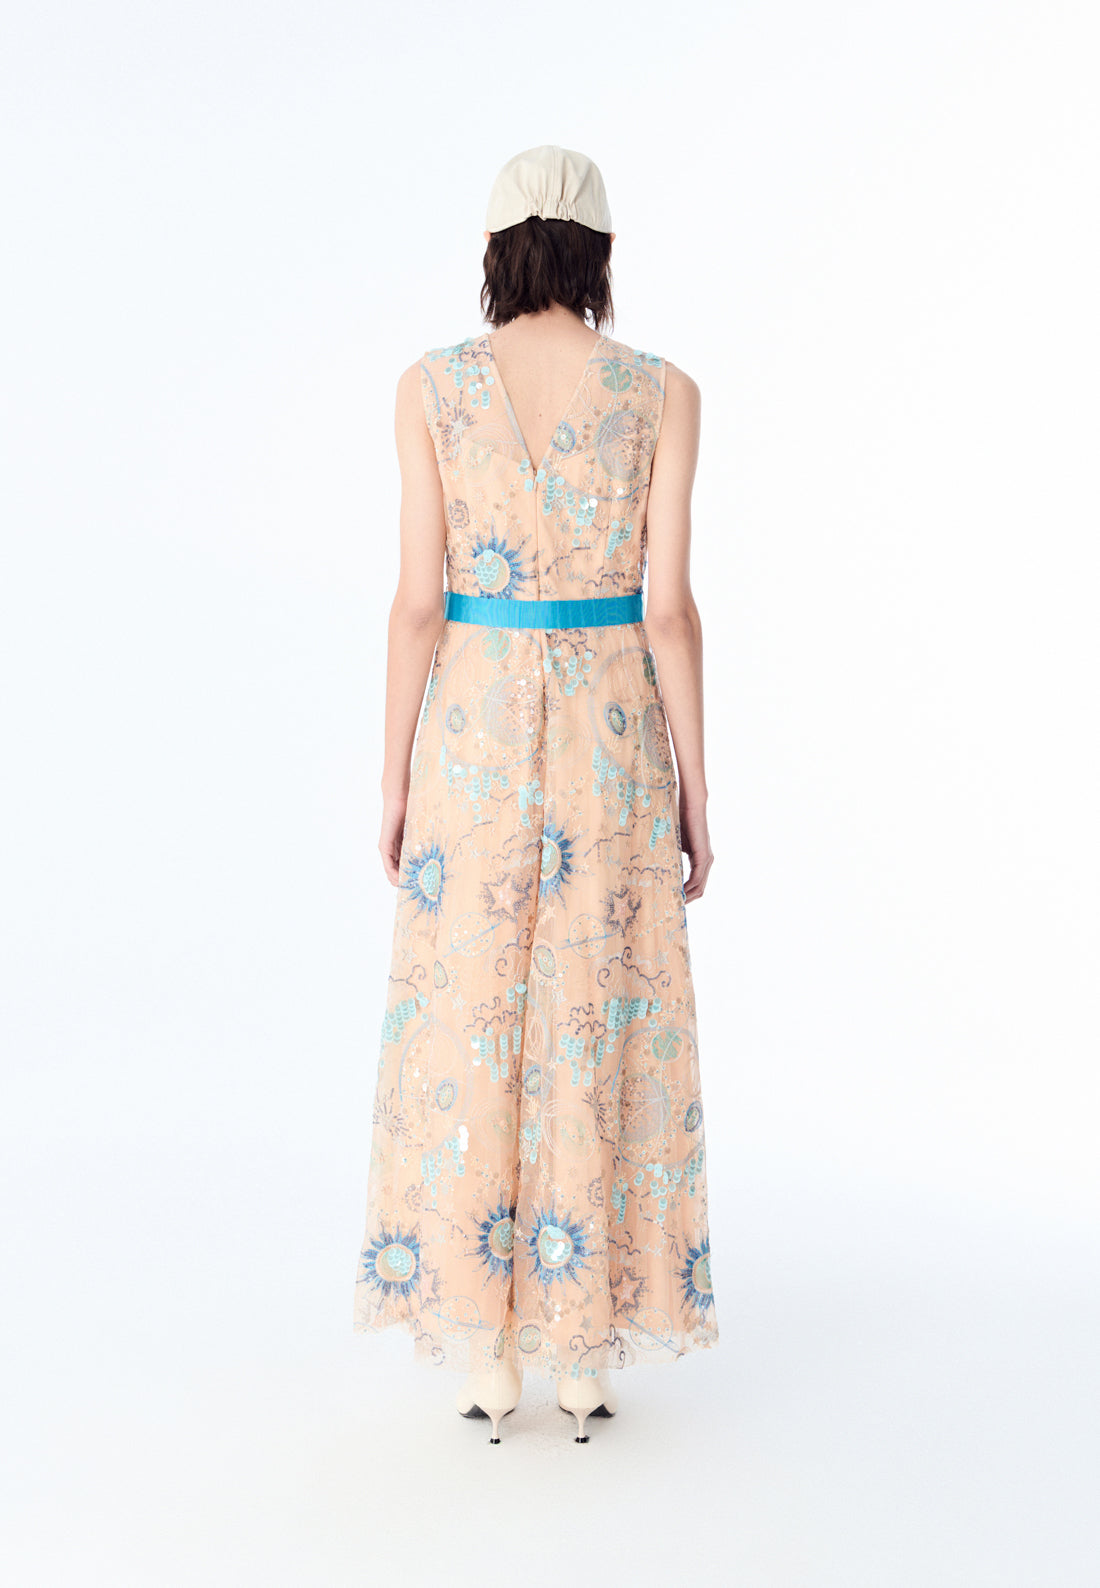 Beige Embroidered Sleeveless with Blue Ribbon Dress - MOISELLE